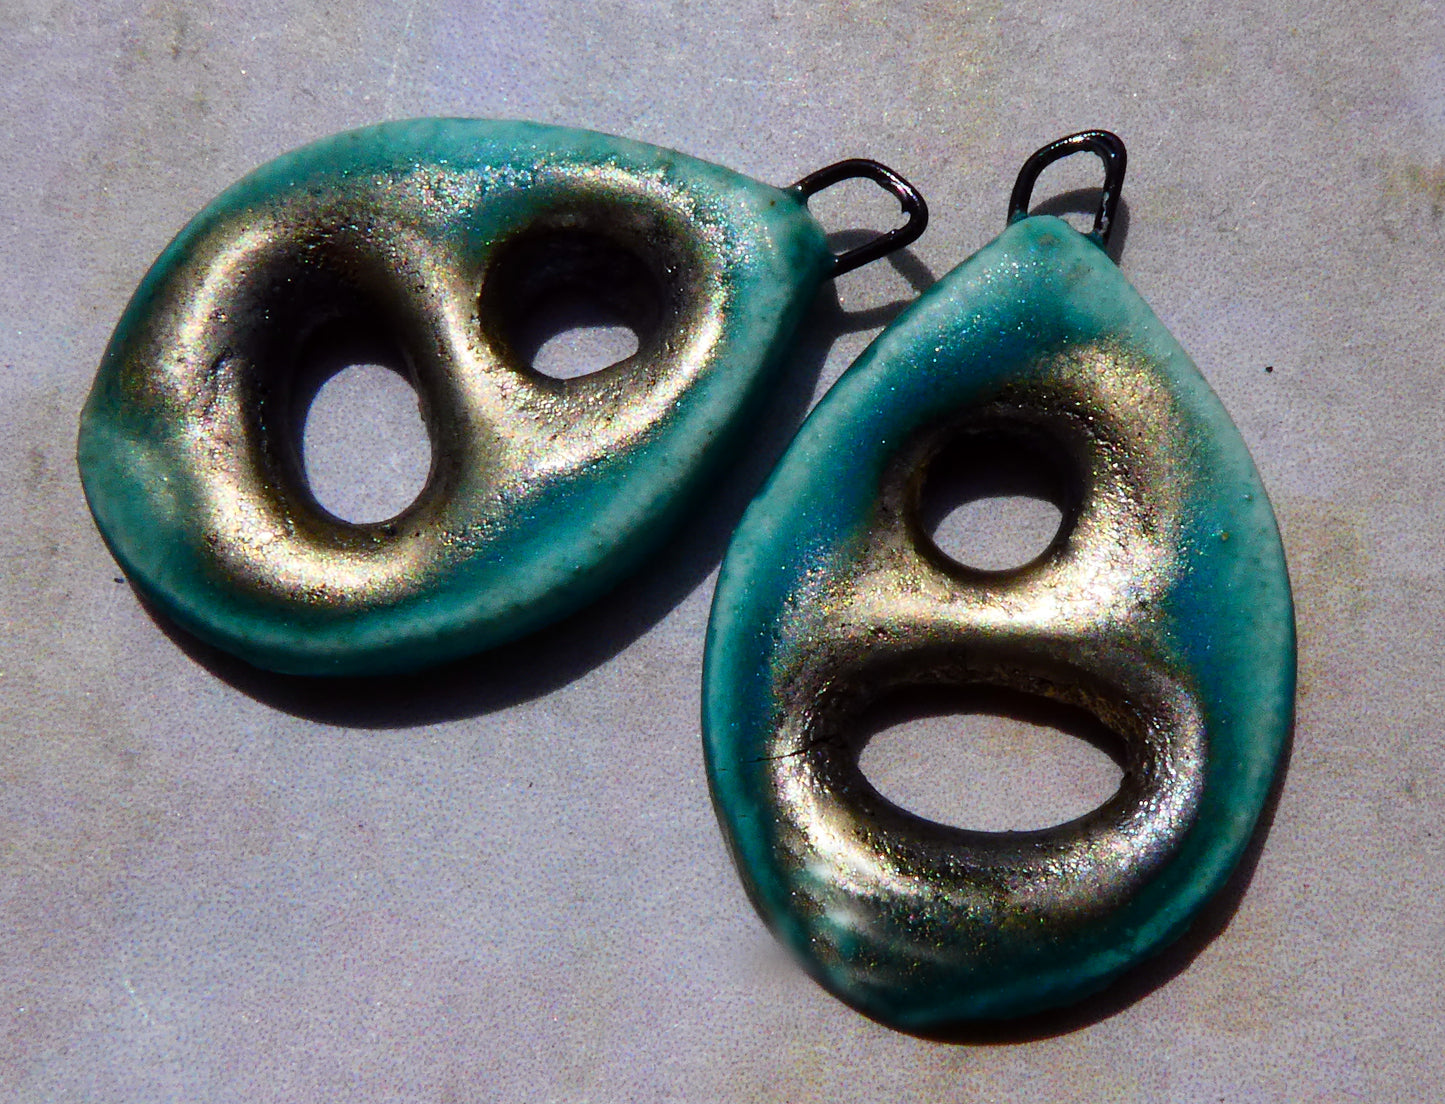 Ceramic Holey Teardrop Earring Charms - Antique Turquoise